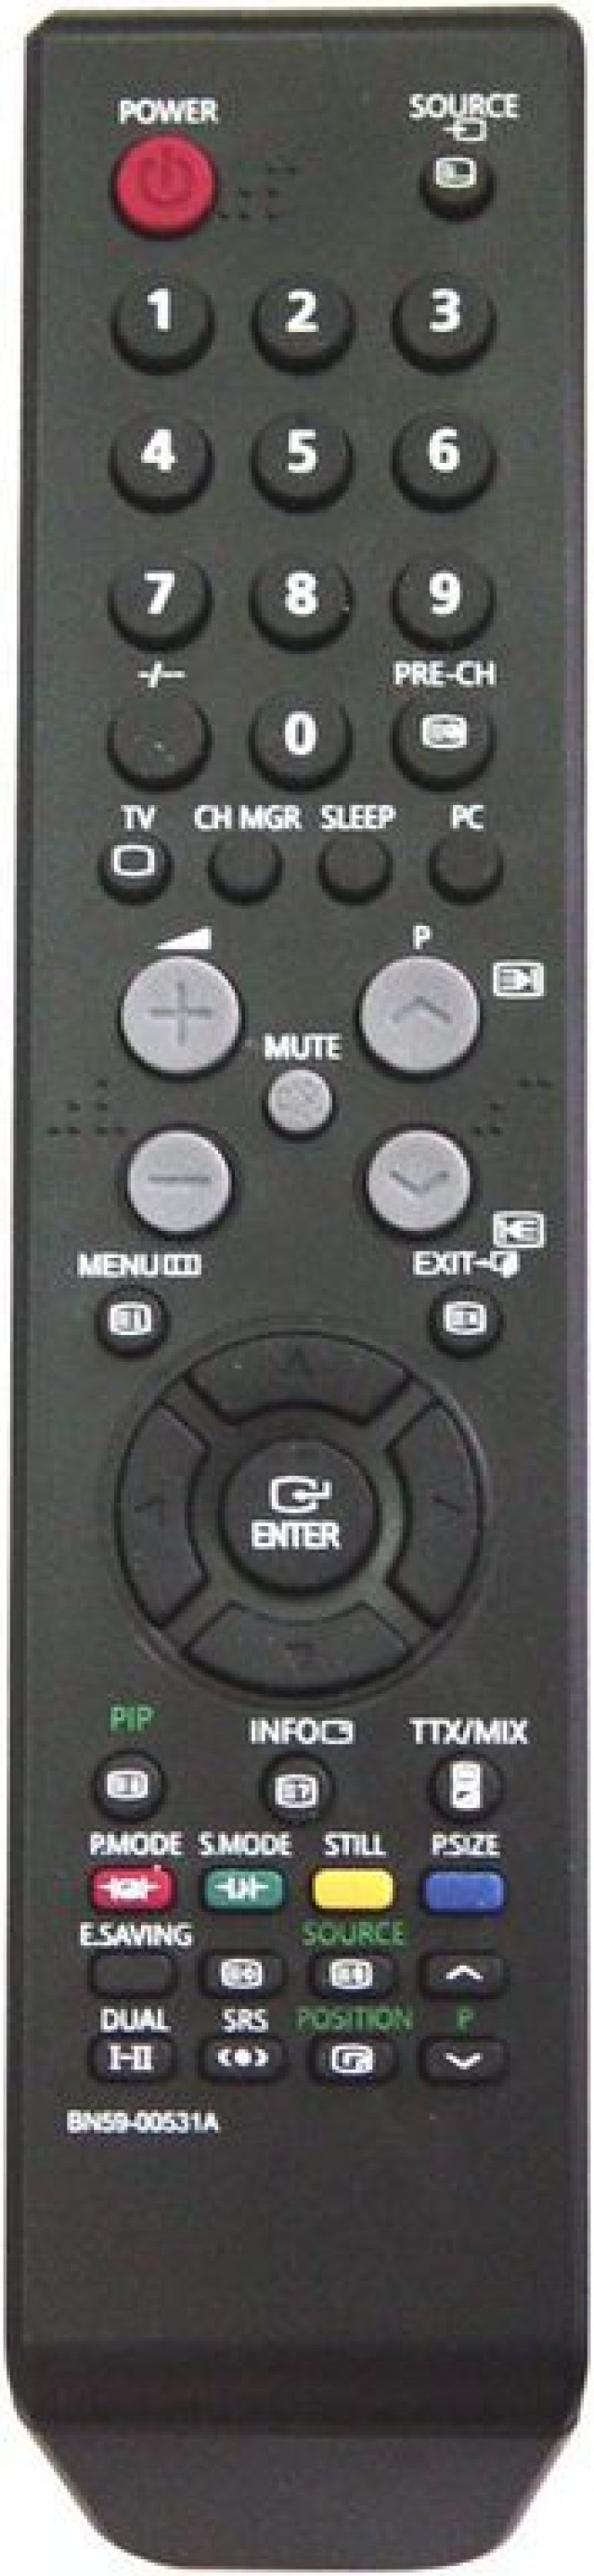 OEM, 0106, Remote control compatible with SAMSUNG BN59-00531